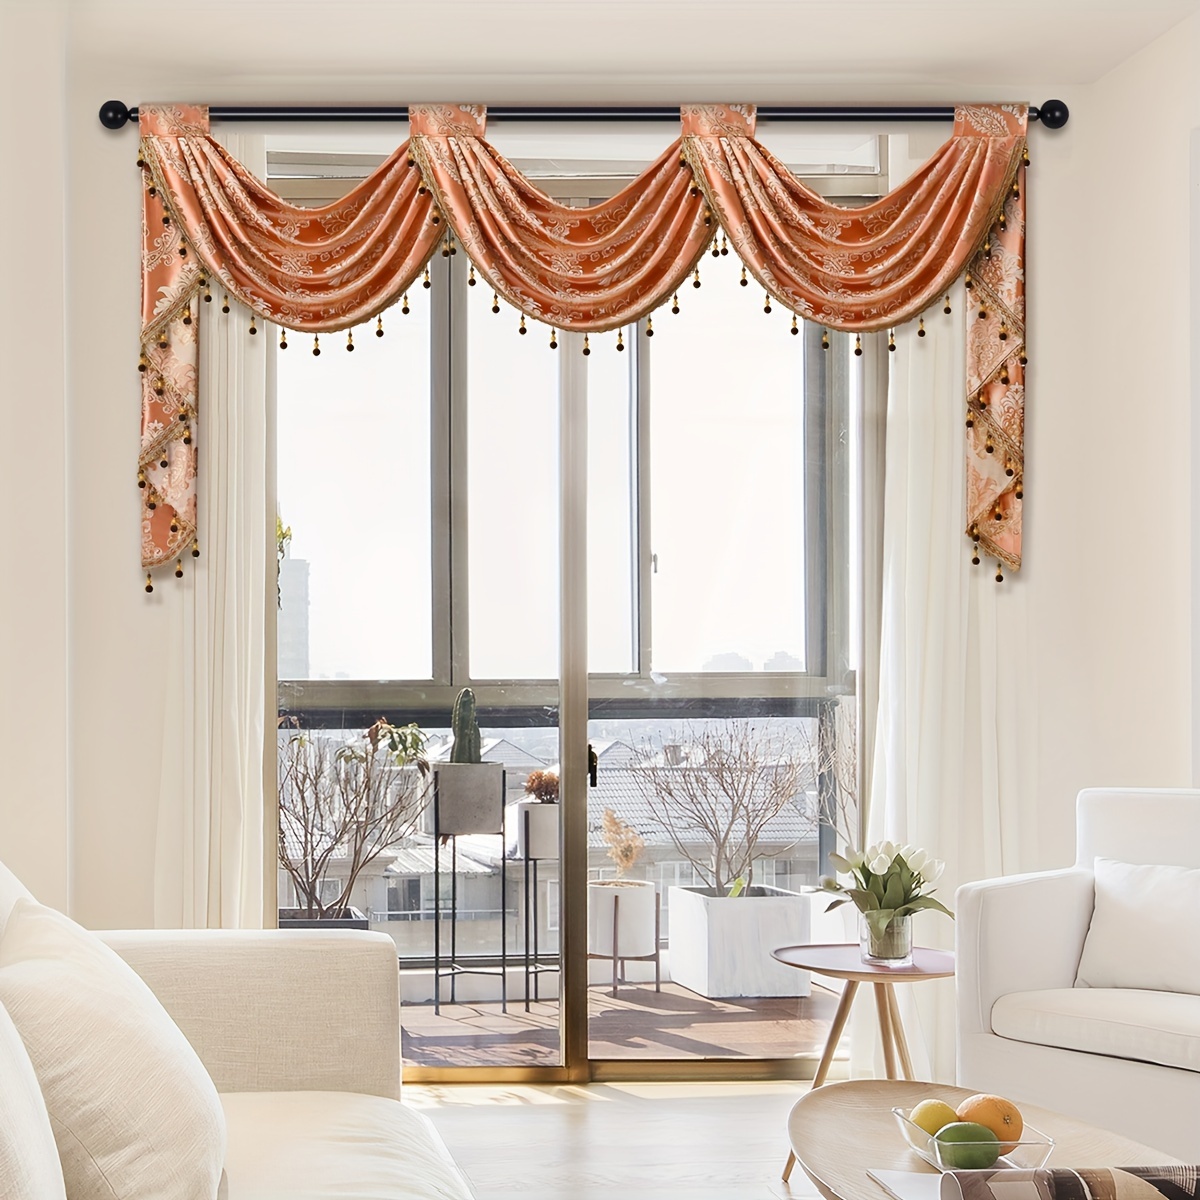 Are Valance Curtains for Living Rooms Out of Style?